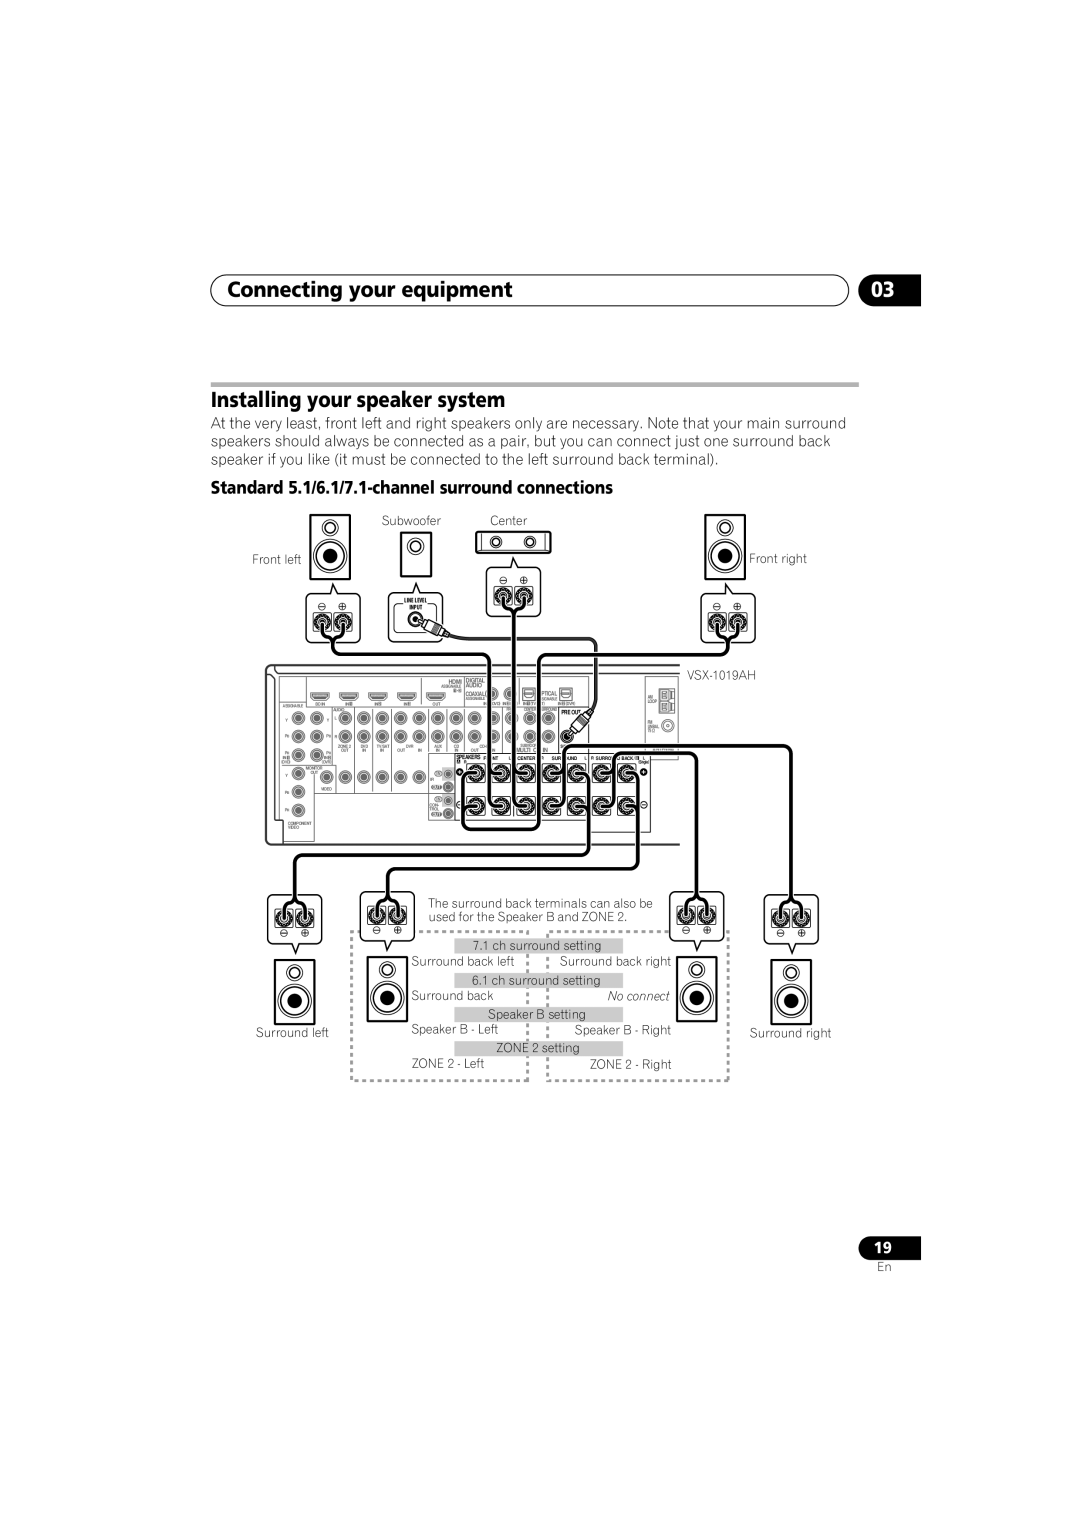 Pioneer VSX-919AH-S manual Installing your speaker system, Standard 5.1/6.1/7.1-channelsurround connections, No connect 